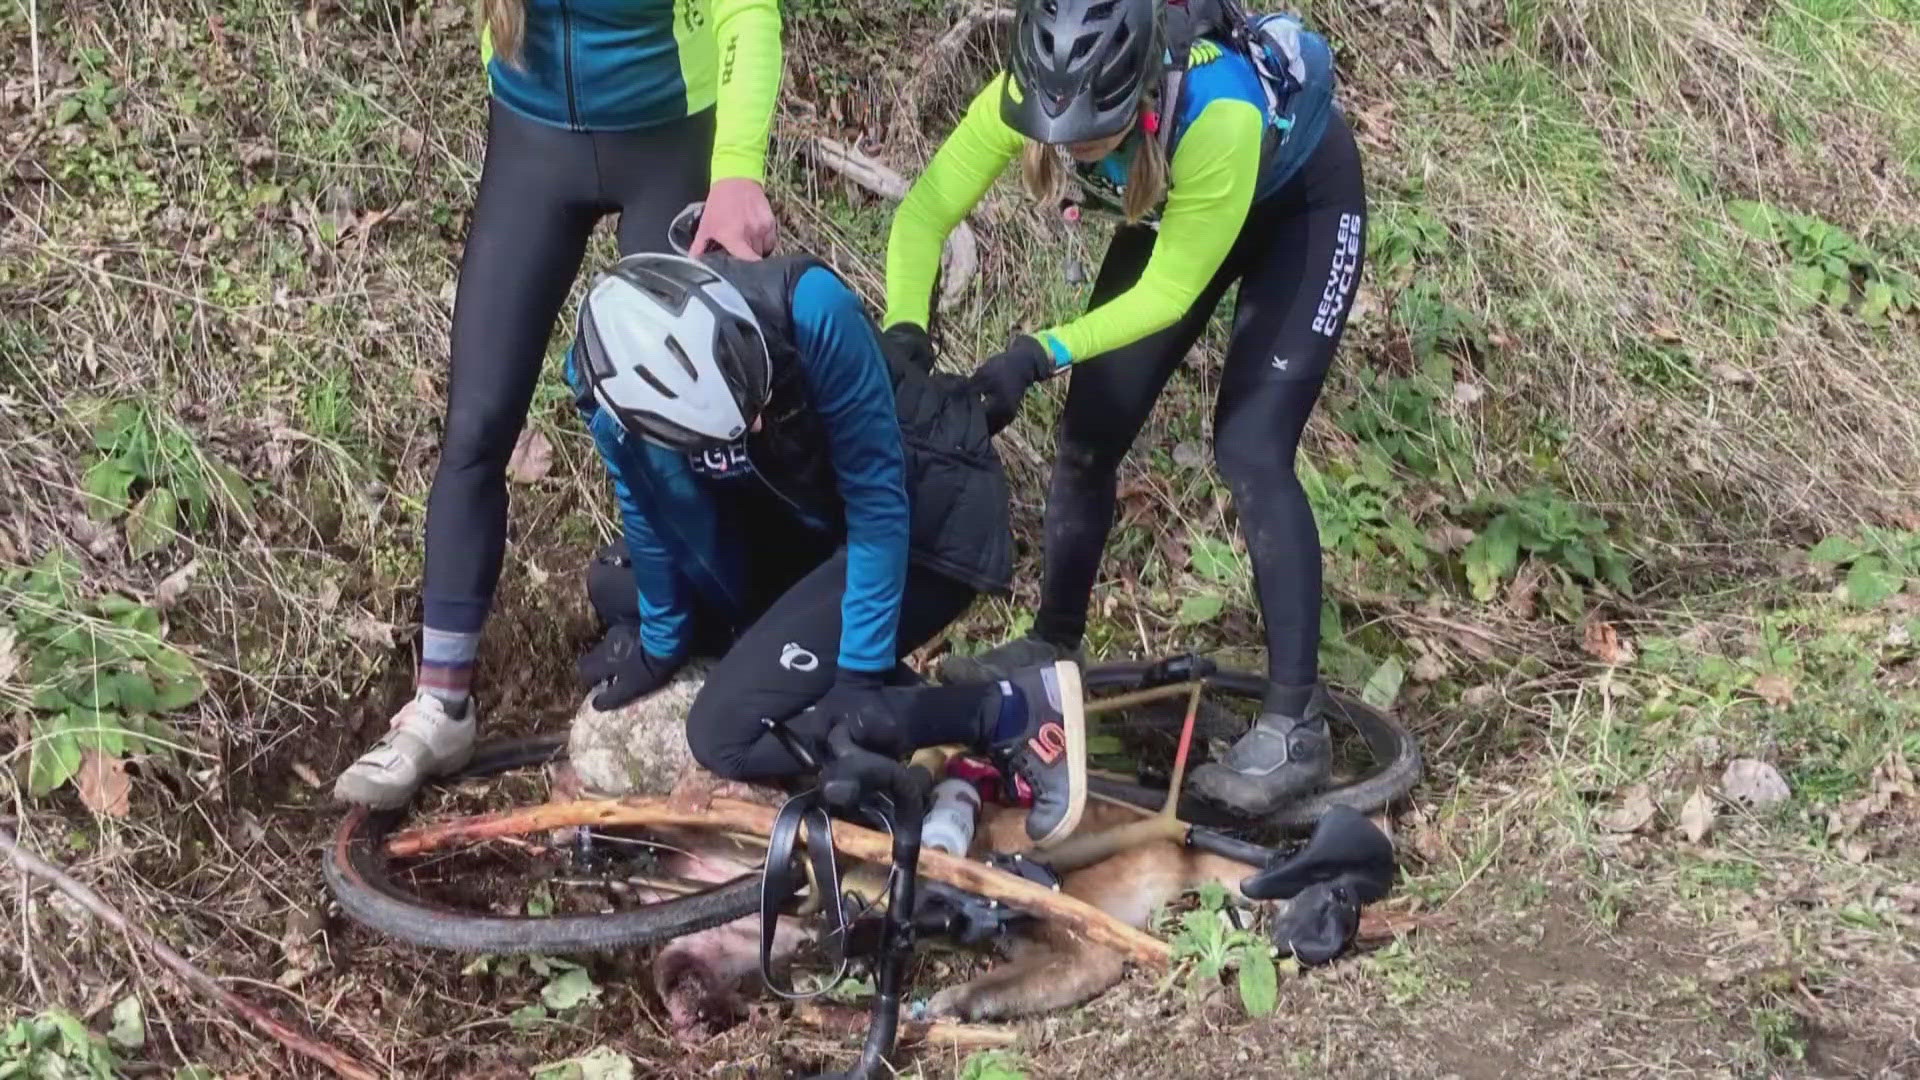 The group of cyclists, who were attacked on Feb. 17 near Snoqualmie, are being recognized for "acts of extraordinary heroism."